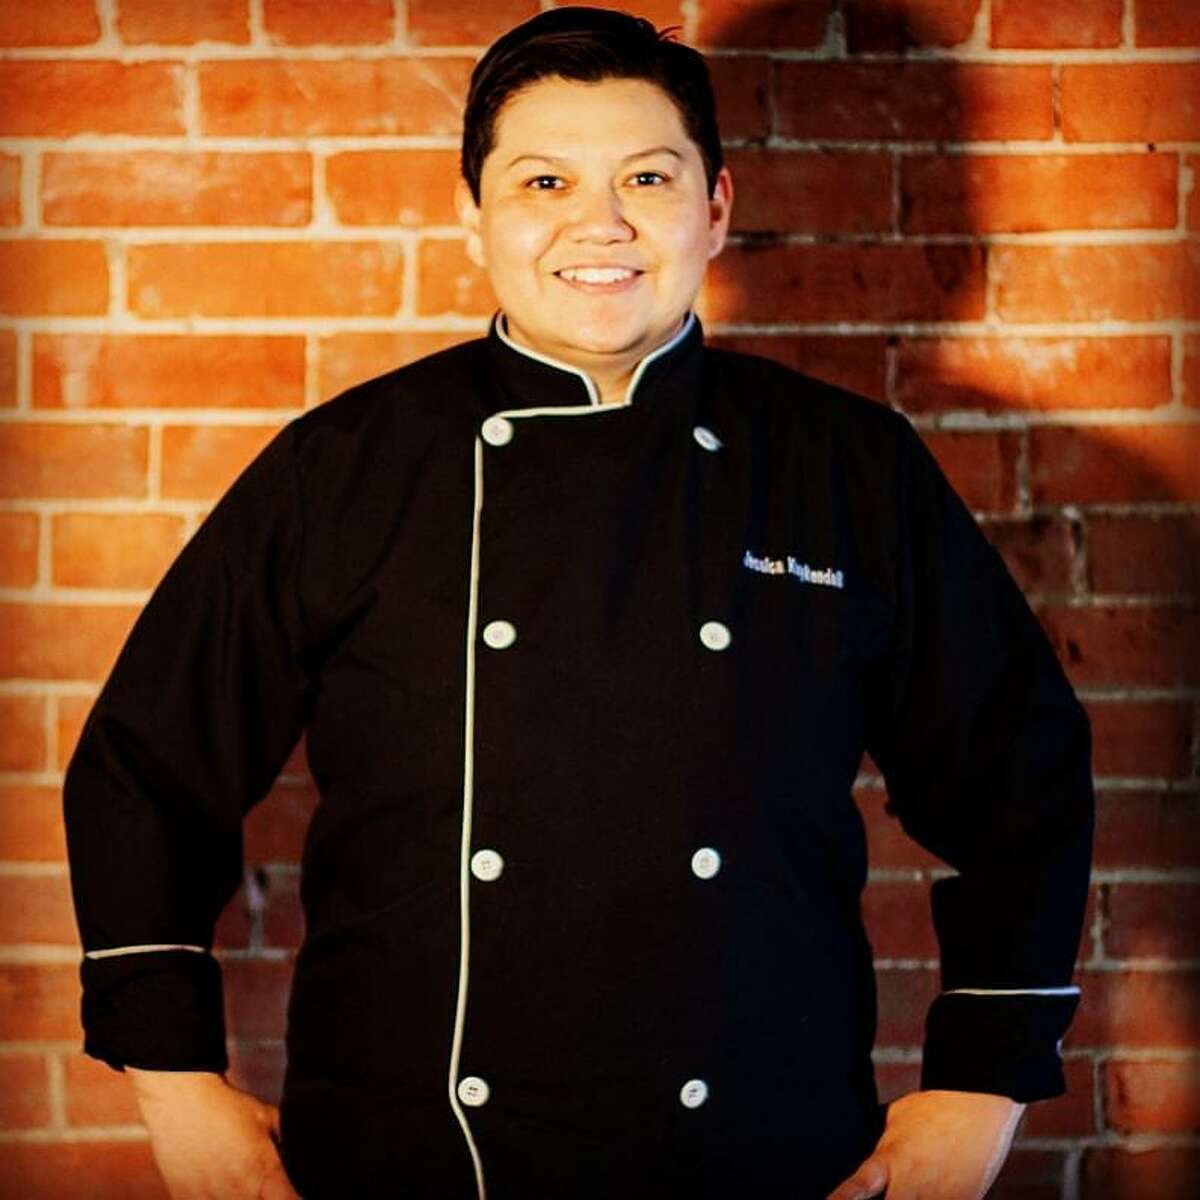 Chef Jesse Kuykendall, or “Chef Kirk,” will be on Food Network’s “Chopped” on Tuesday night as the Laredo native competes in the nationally-televised cooking competition.